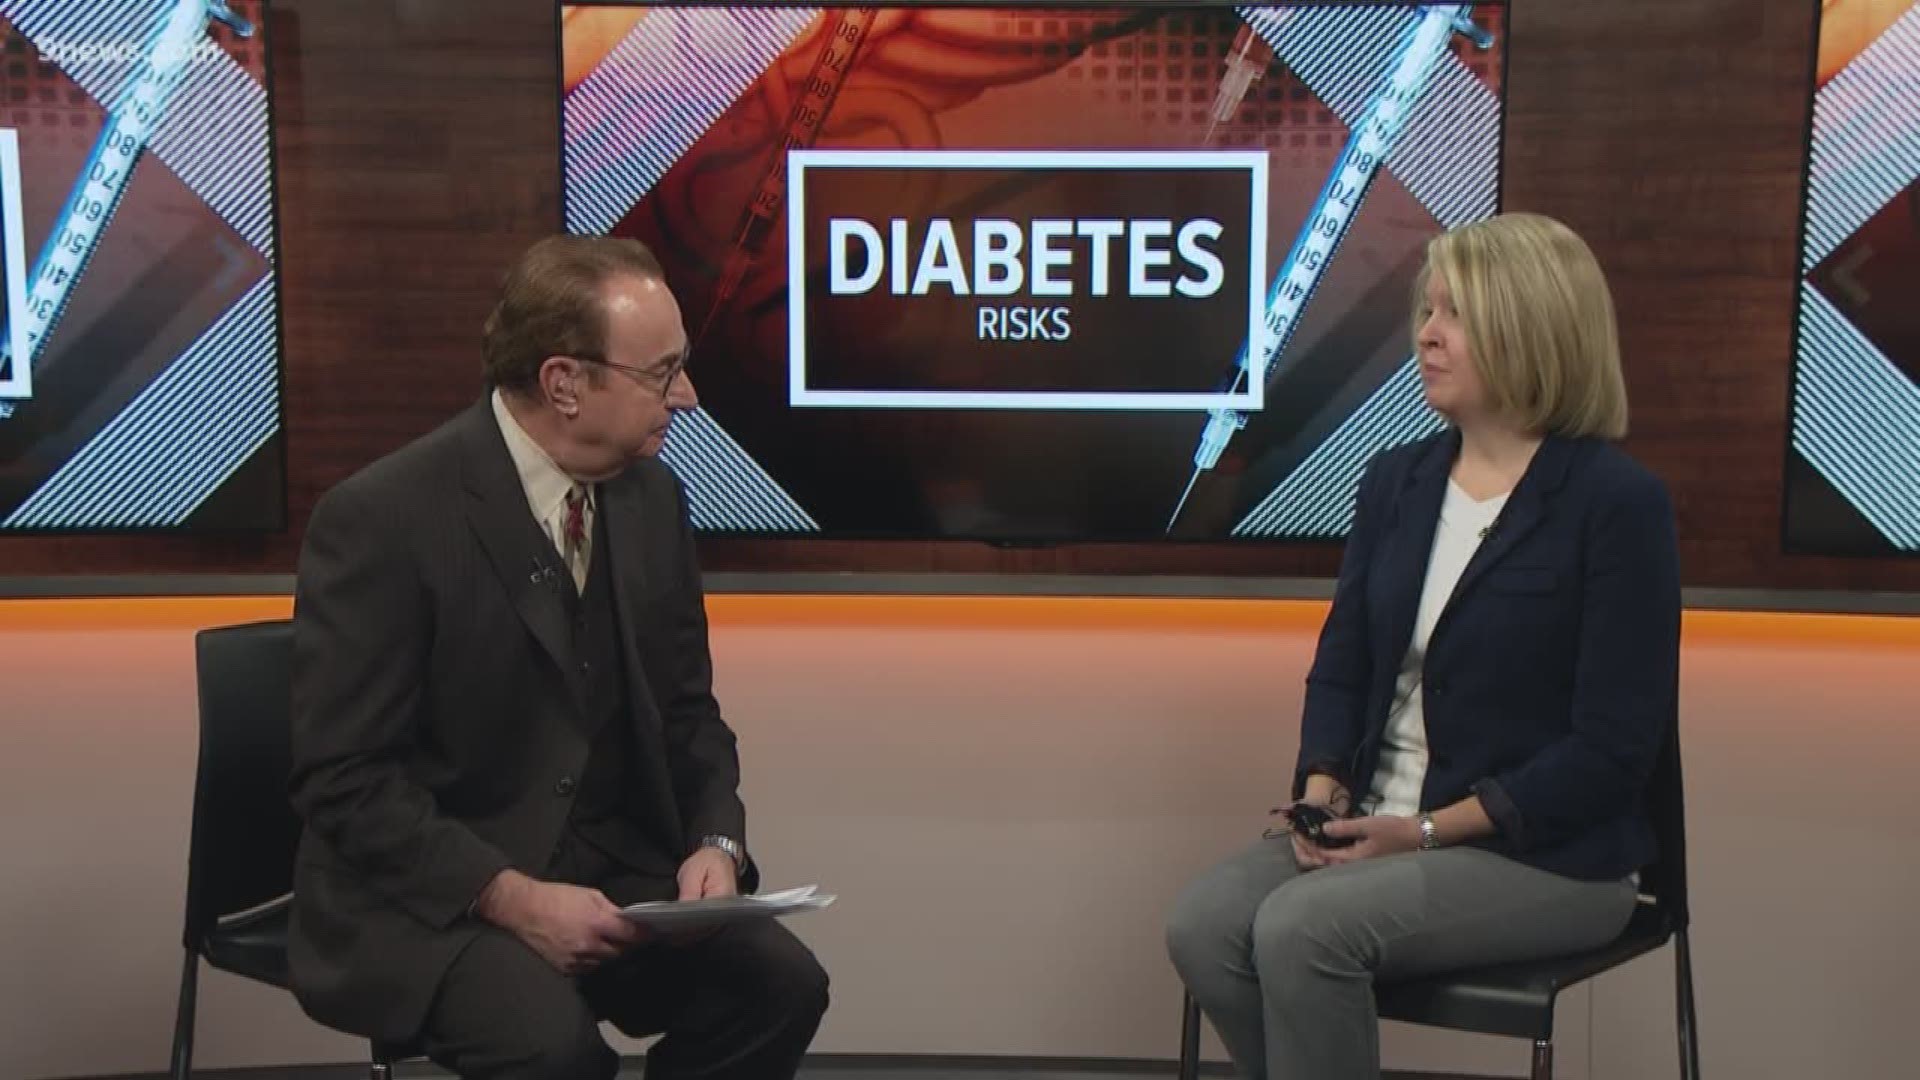 The Colorado Health Dept. estimates that more than one-third of adults in CO have prediabetes and my not even know it. Visit a 9Health Fair to learn your numbers.